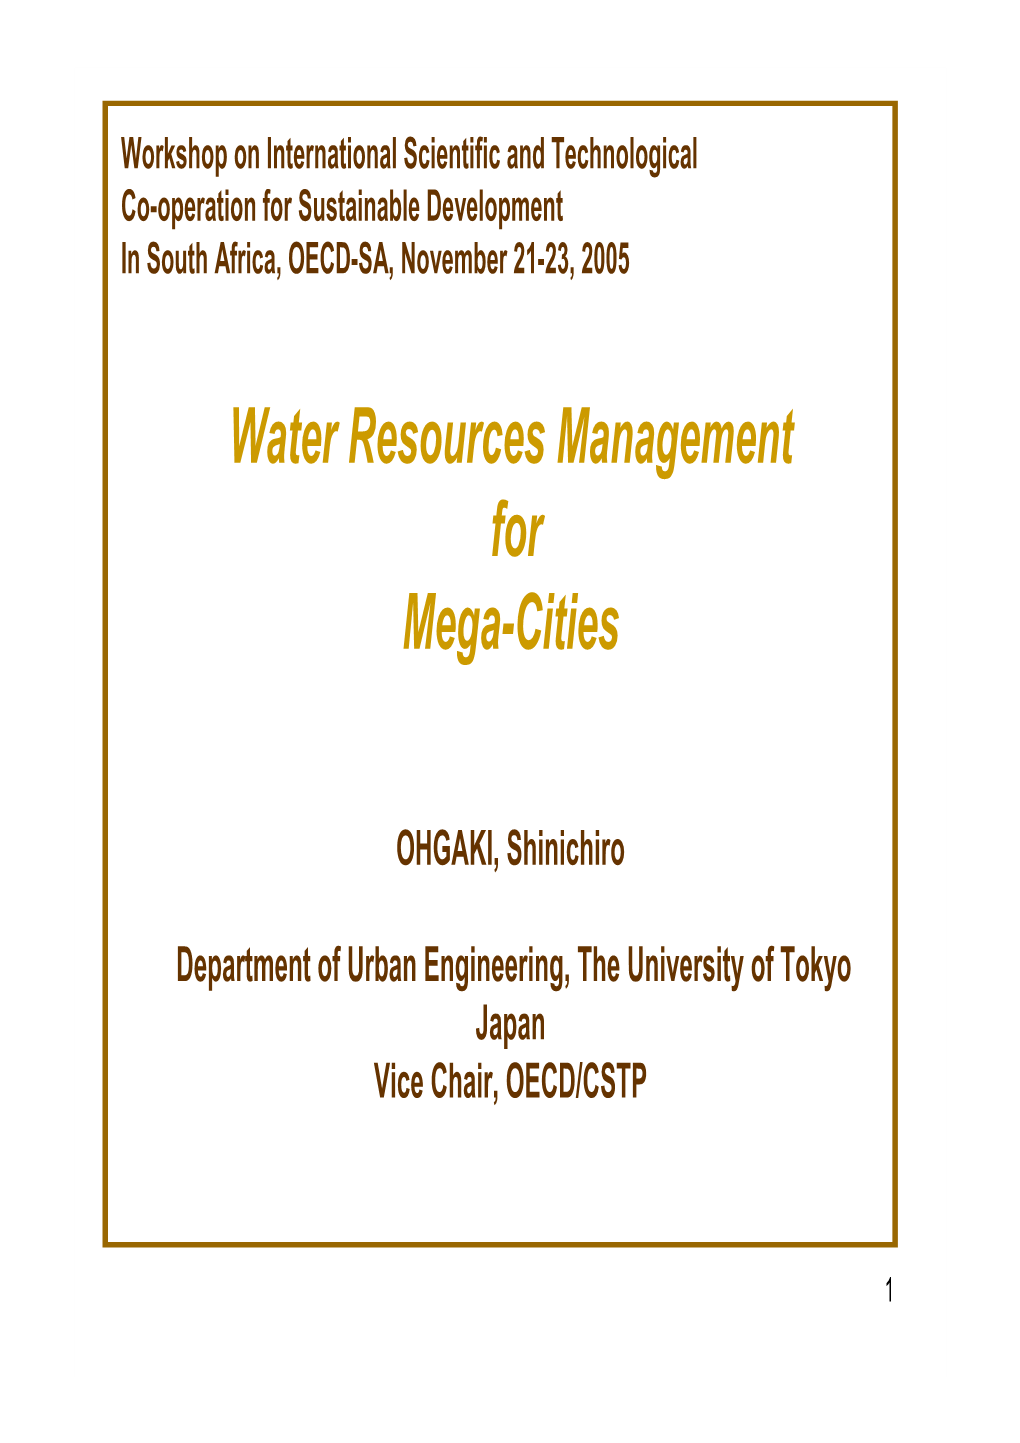 Water Resources Management for Mega-Cities